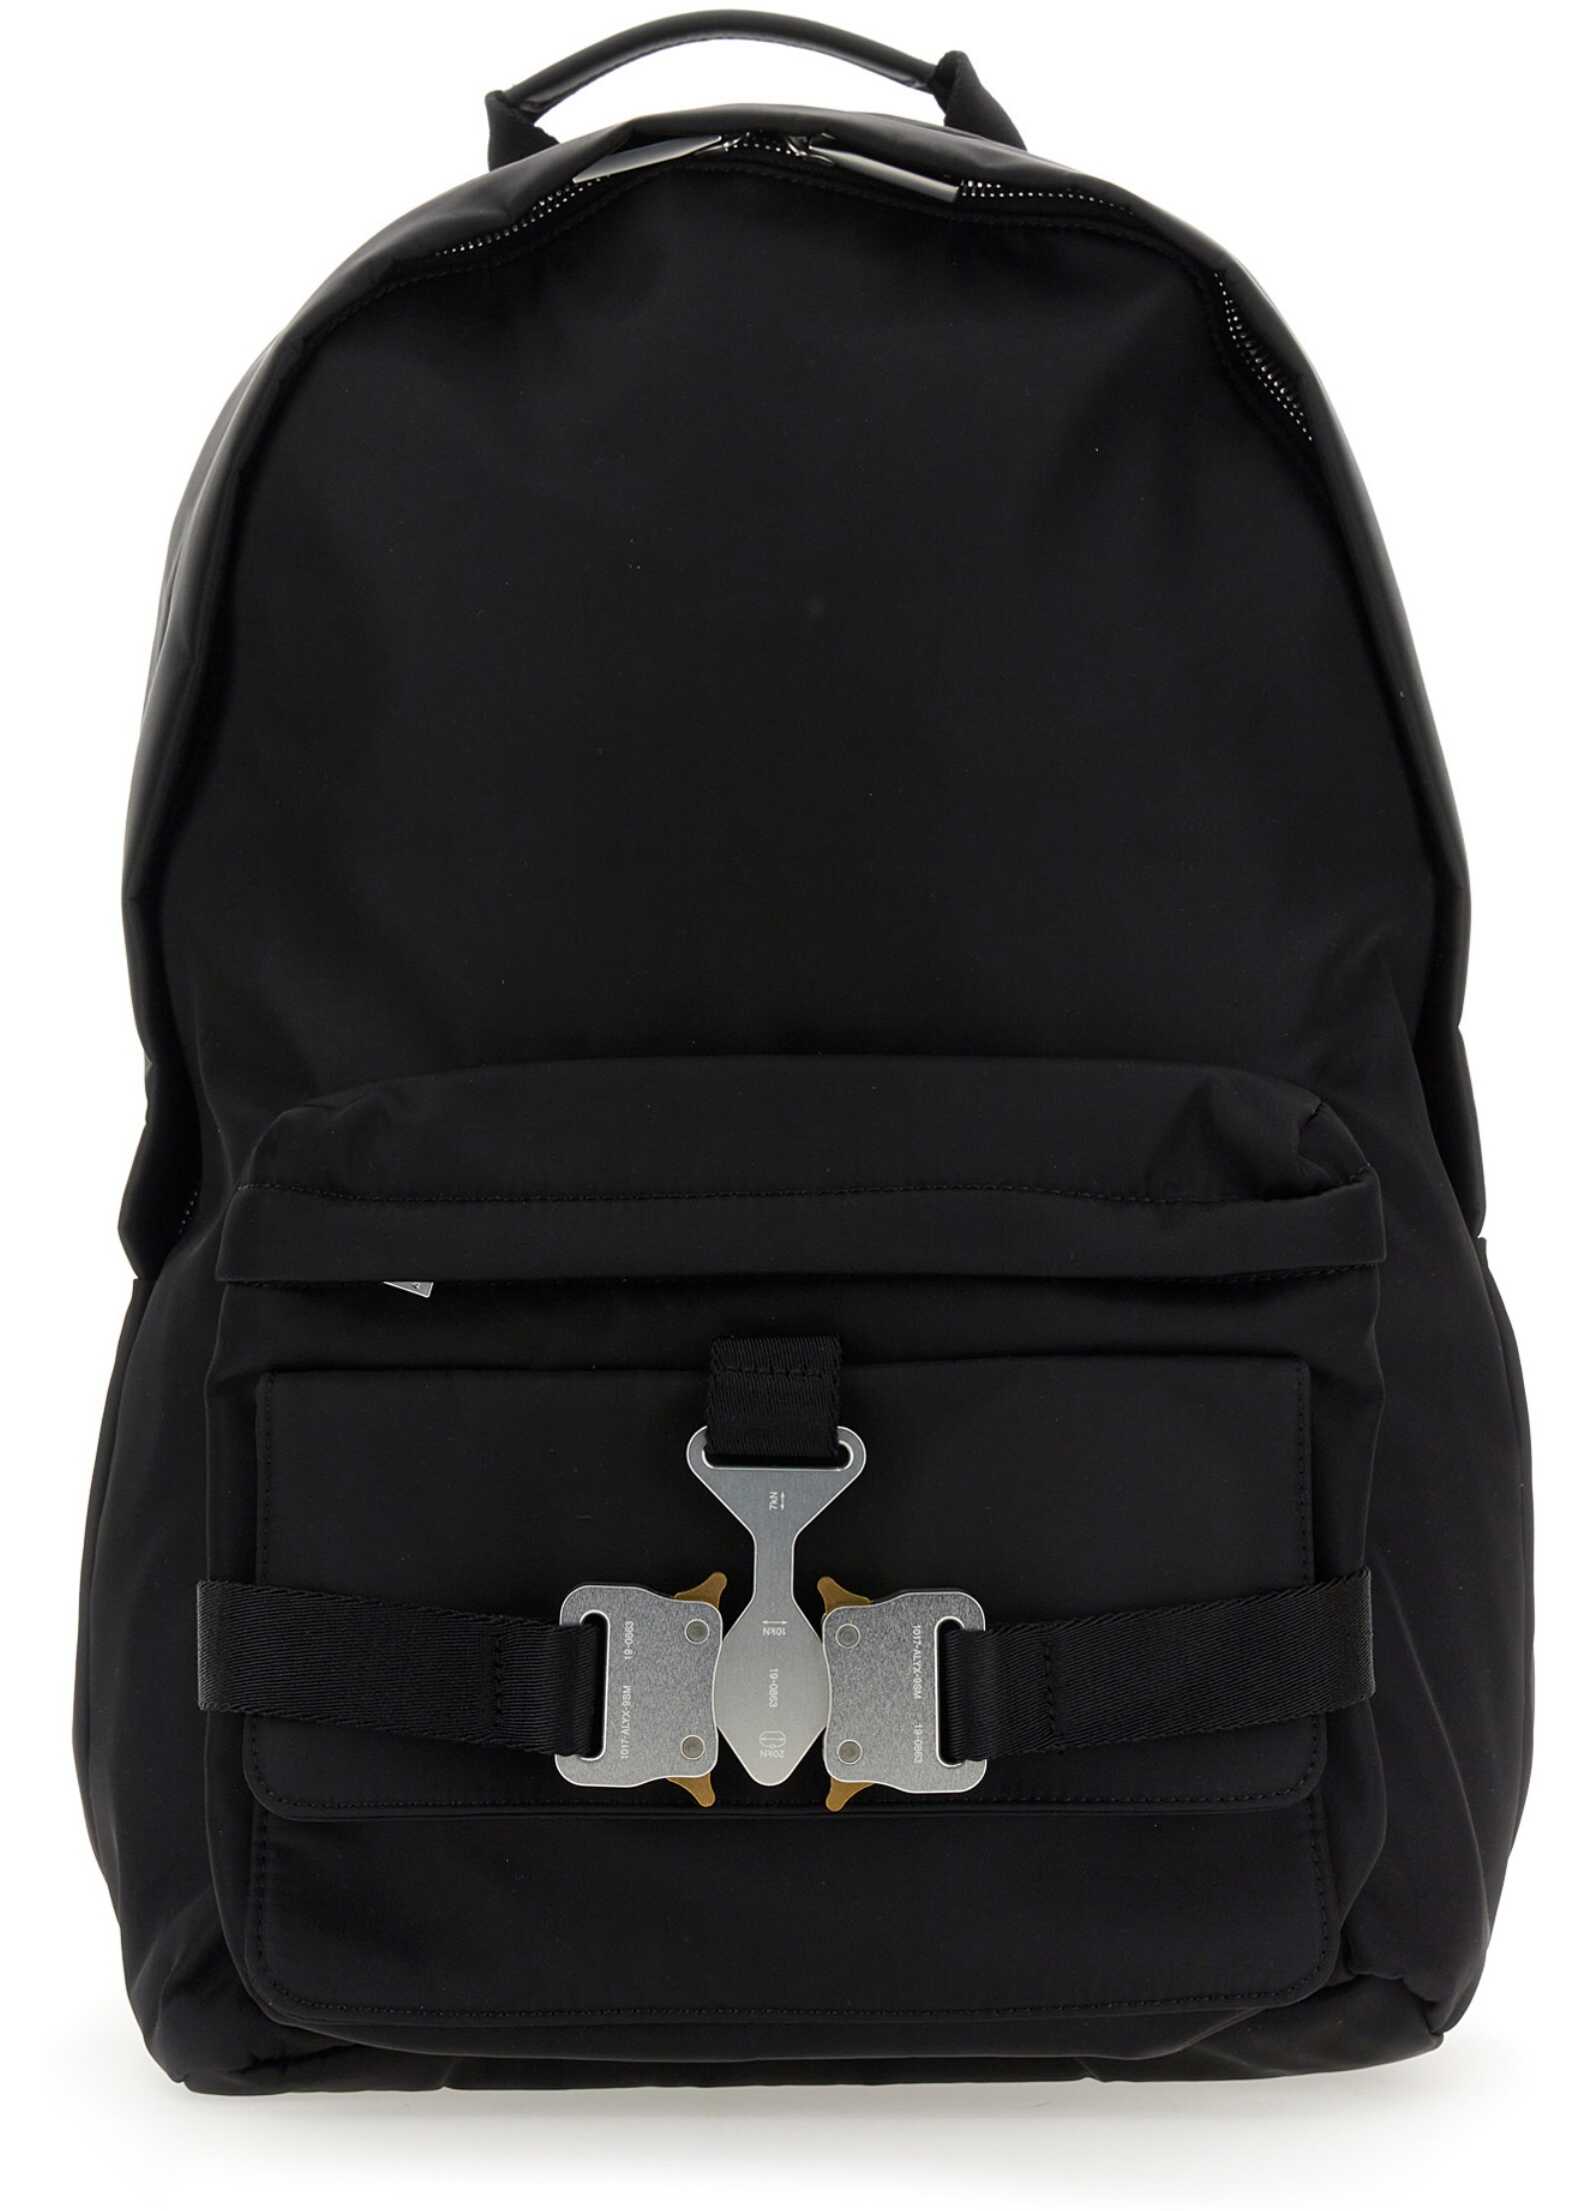 1017 ALYX 9SM Backpack “Tricon” BLACK